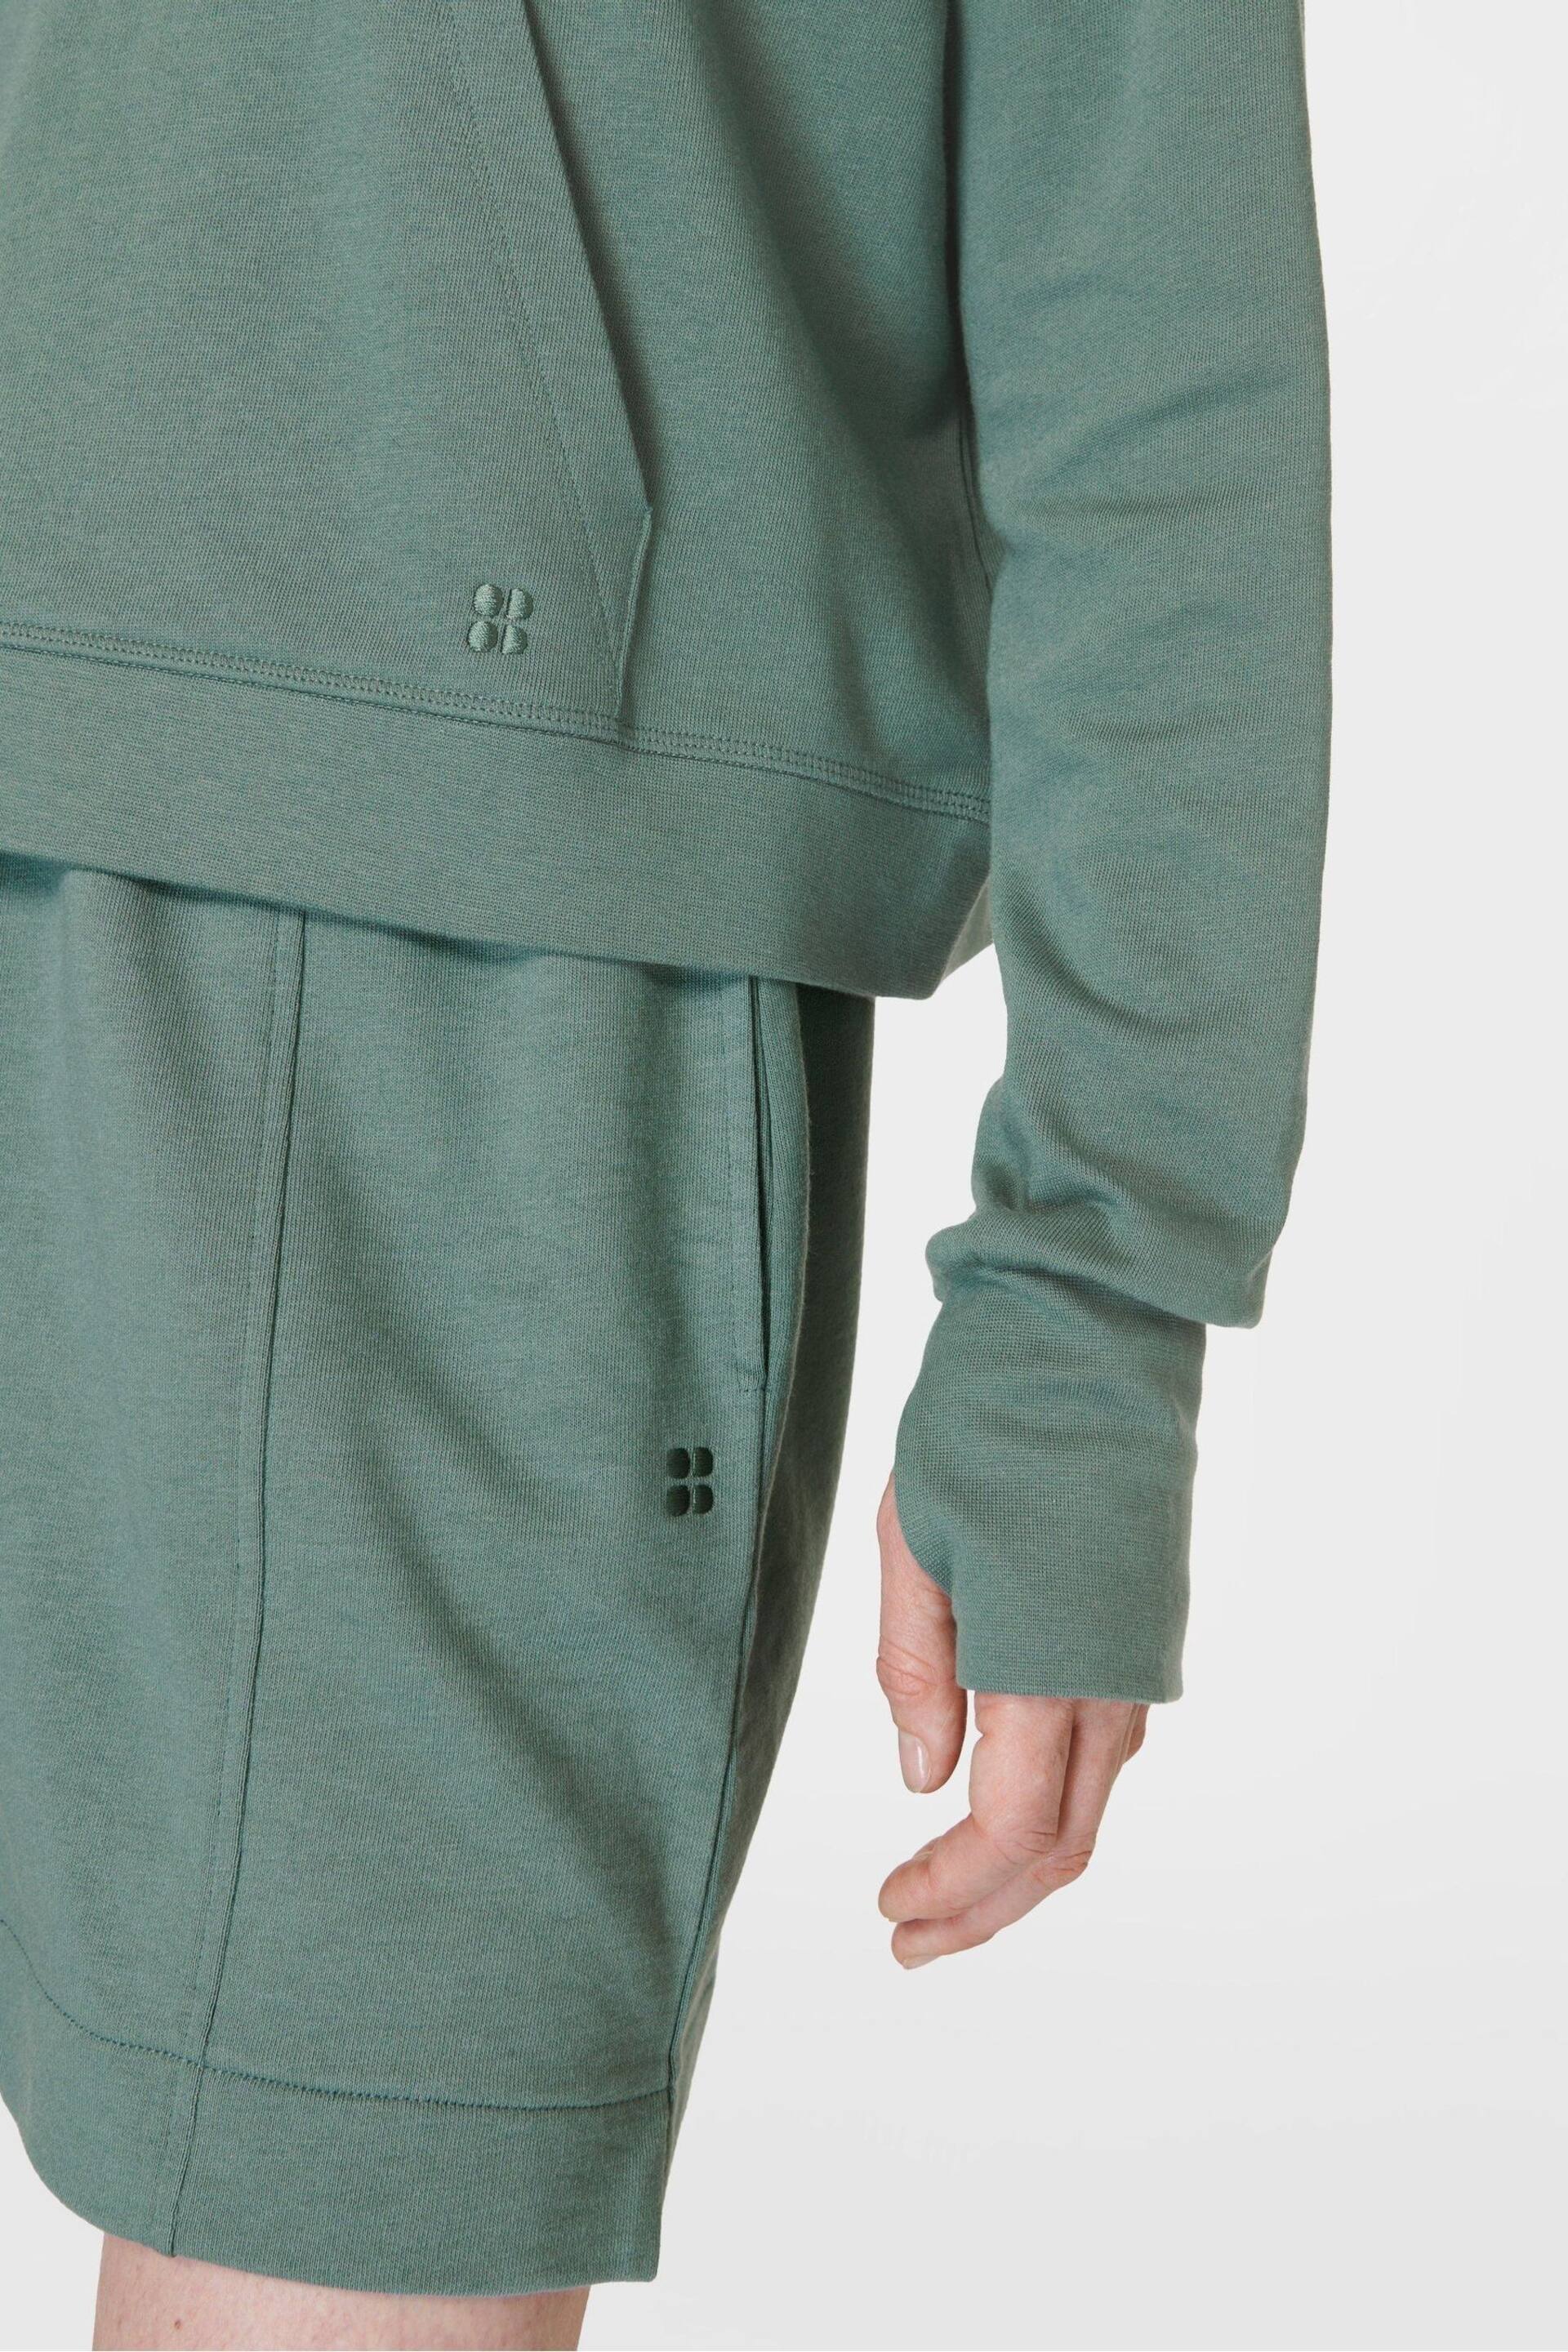 Sweaty Betty Cool Forest Green After Class Hoodie - Image 4 of 7